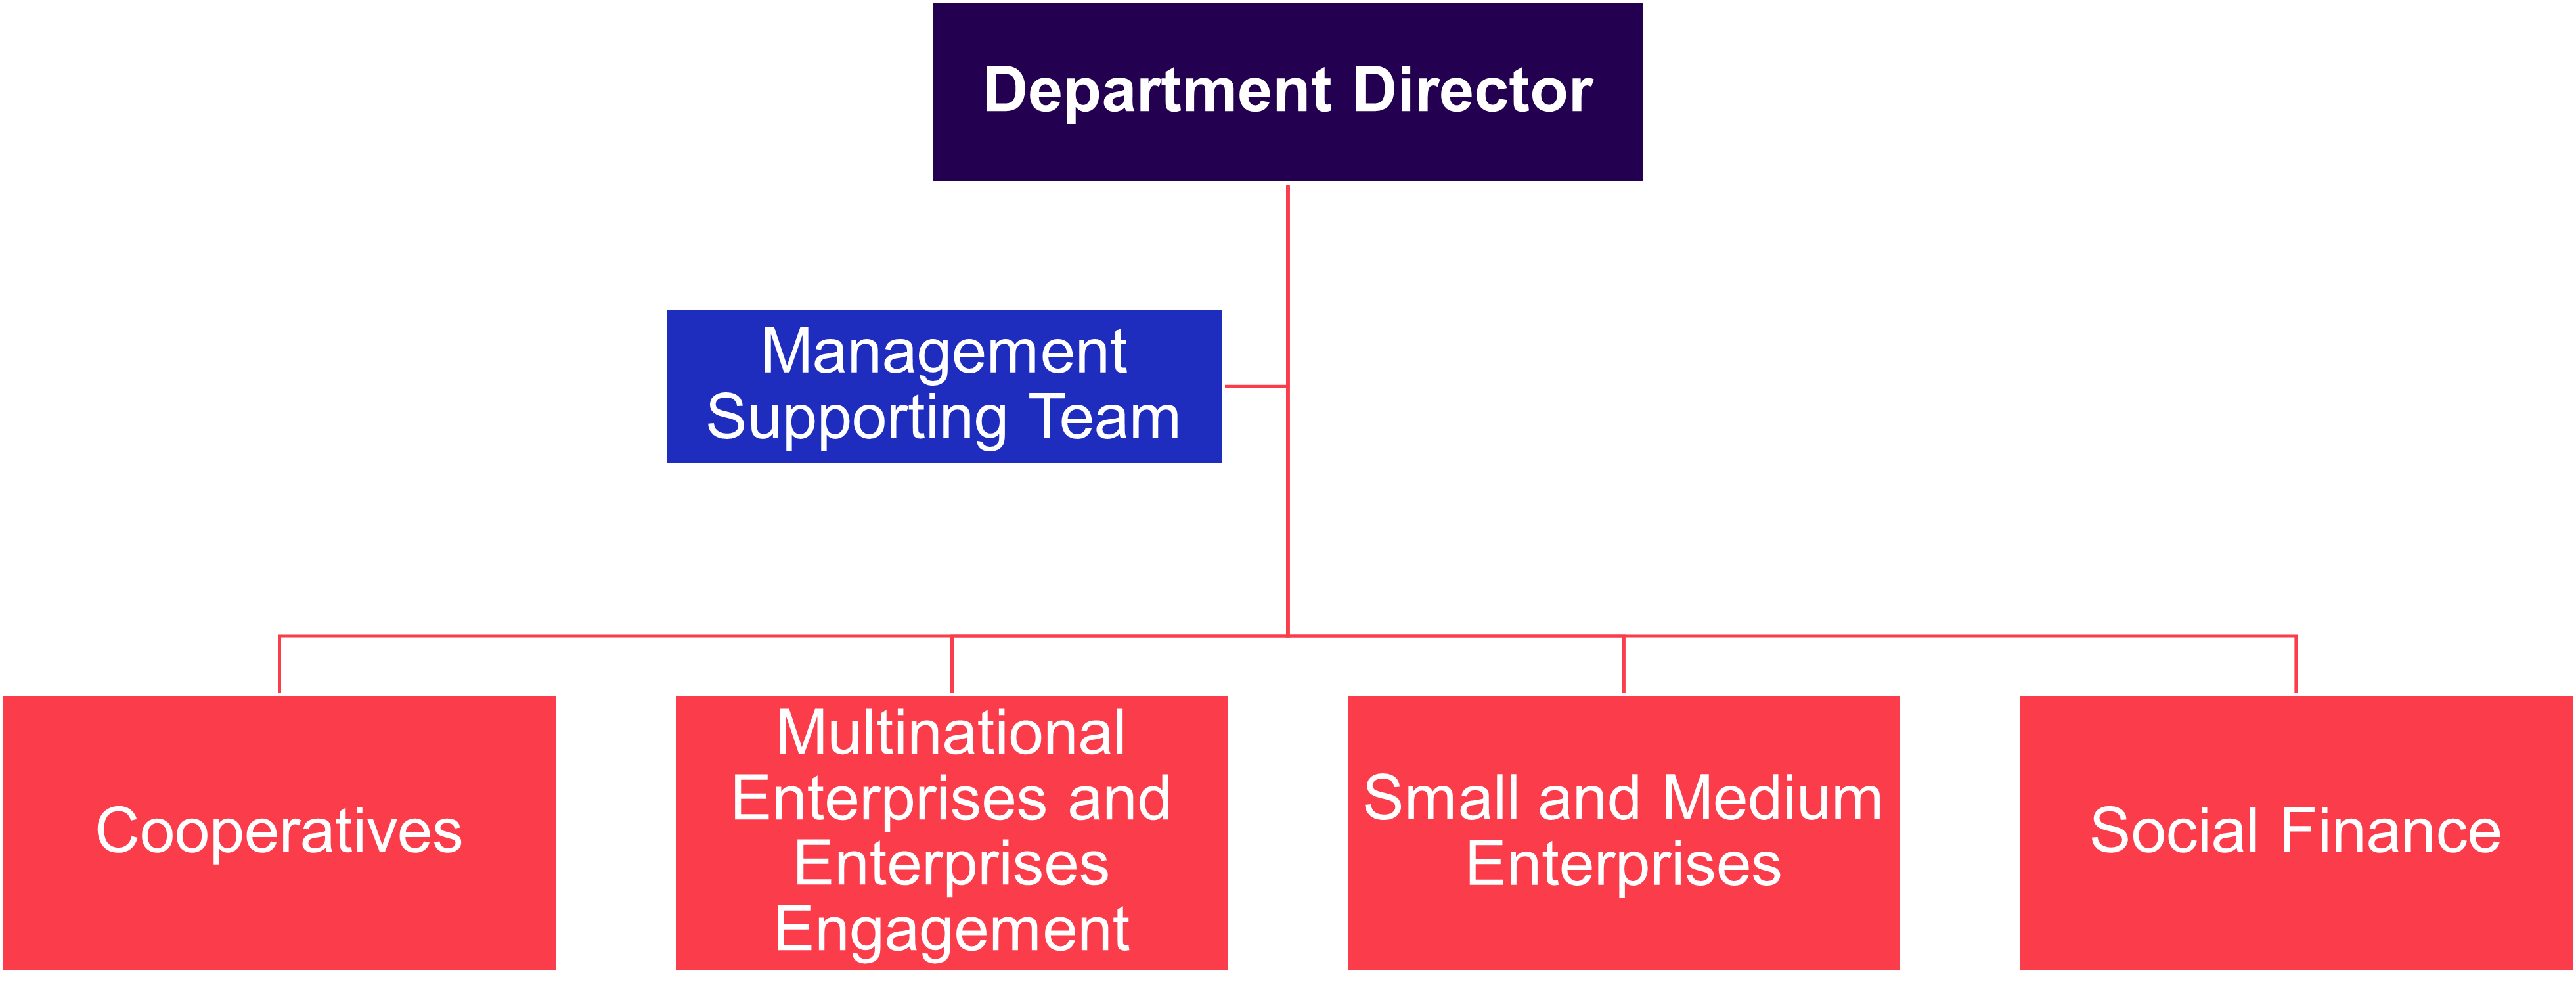 organizational chart of the Department of Sustainable Enterprises, Productivity and Just Transition